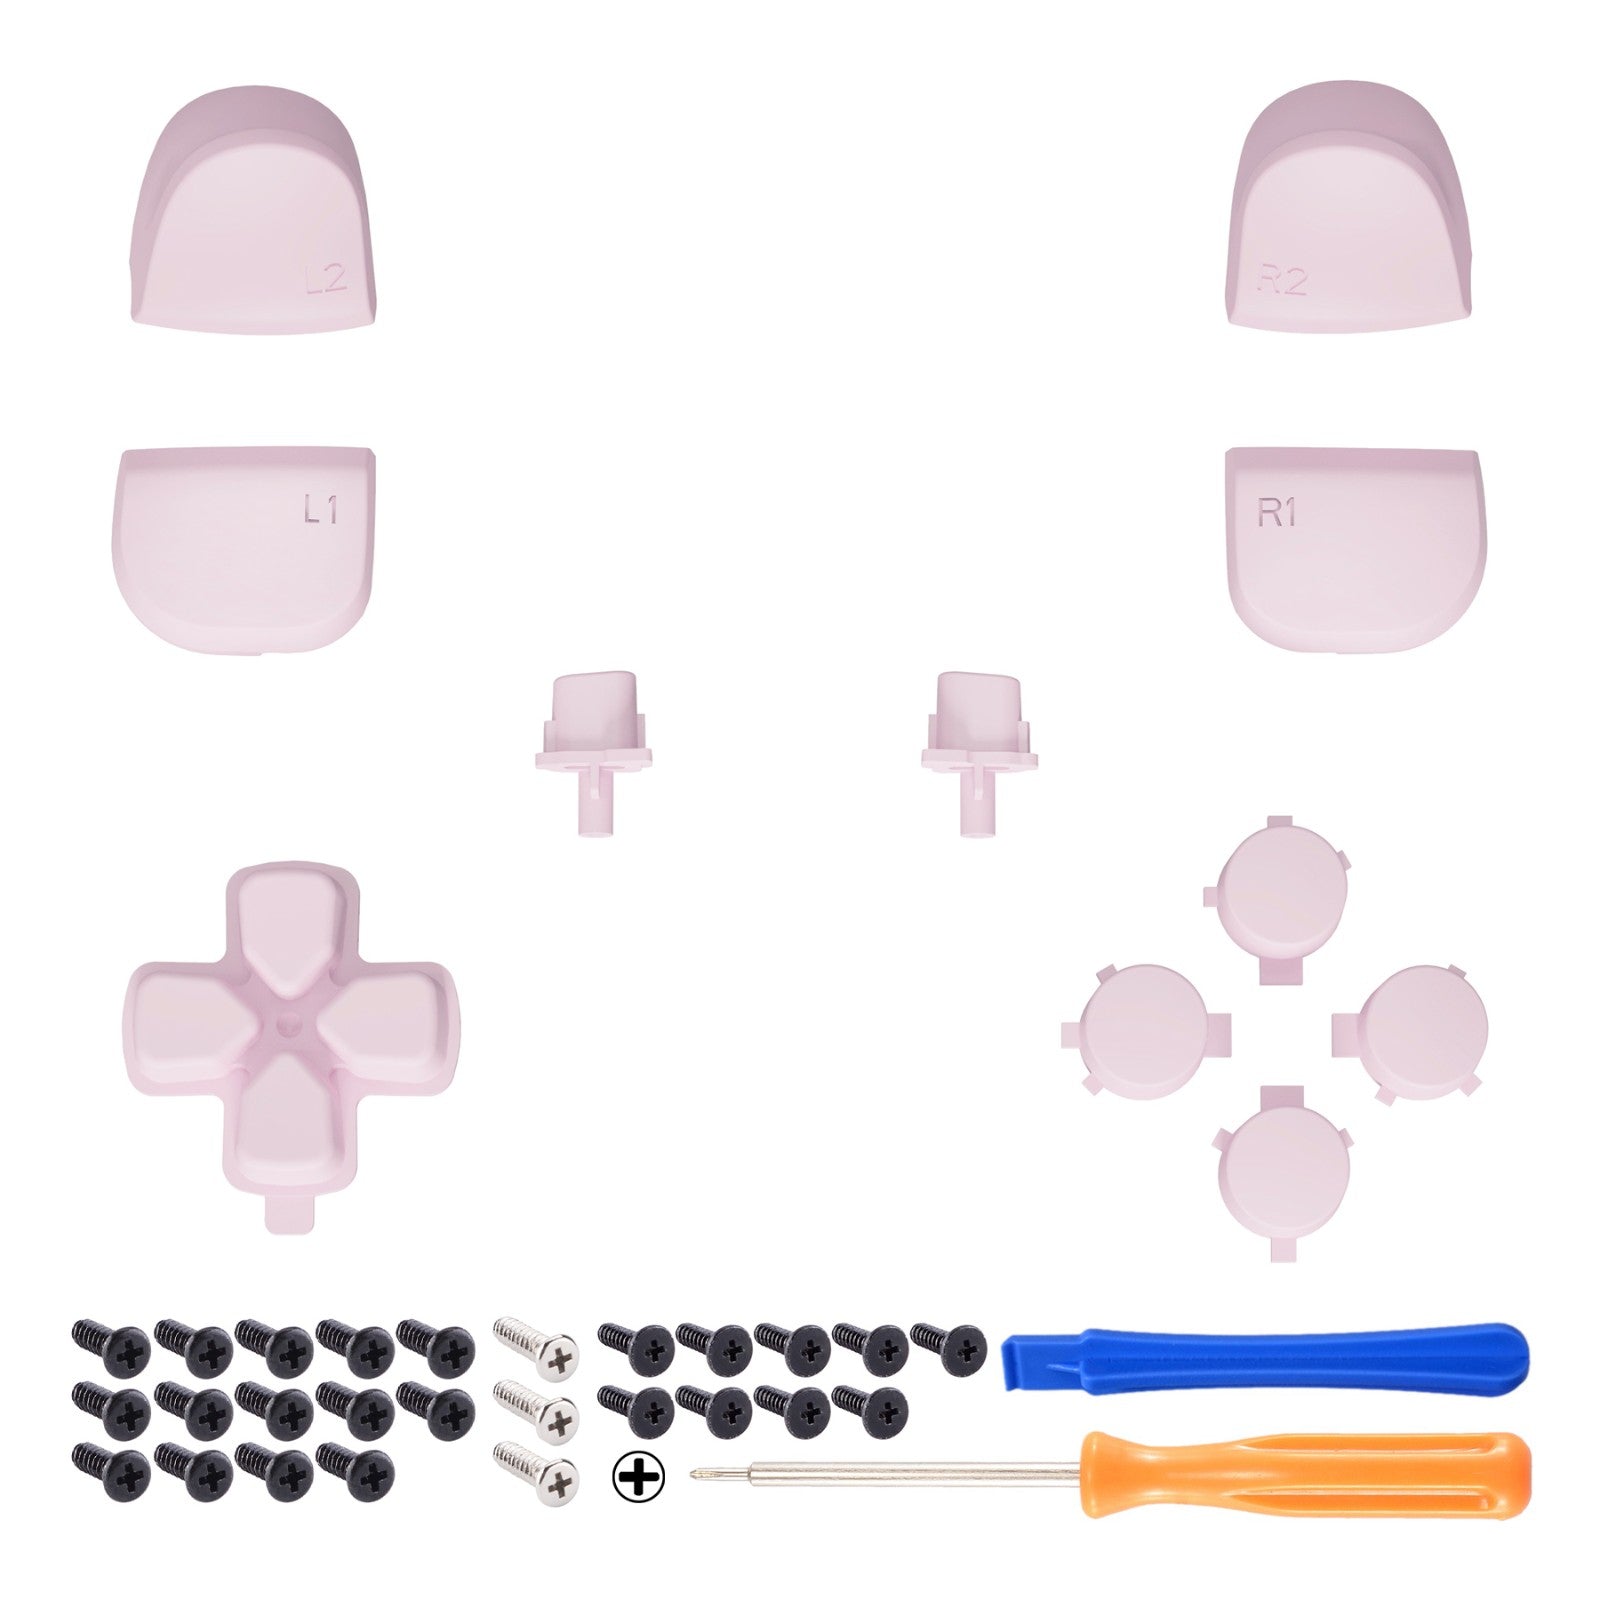 eXtremeRate Retail Replacement D-pad R1 L1 R2 L2 Triggers Share Options Face Buttons, Cherry Blossoms Pink Full Set Buttons Compatible with ps5 Controller BDM-010 & BDM-020 - JPF1012G2